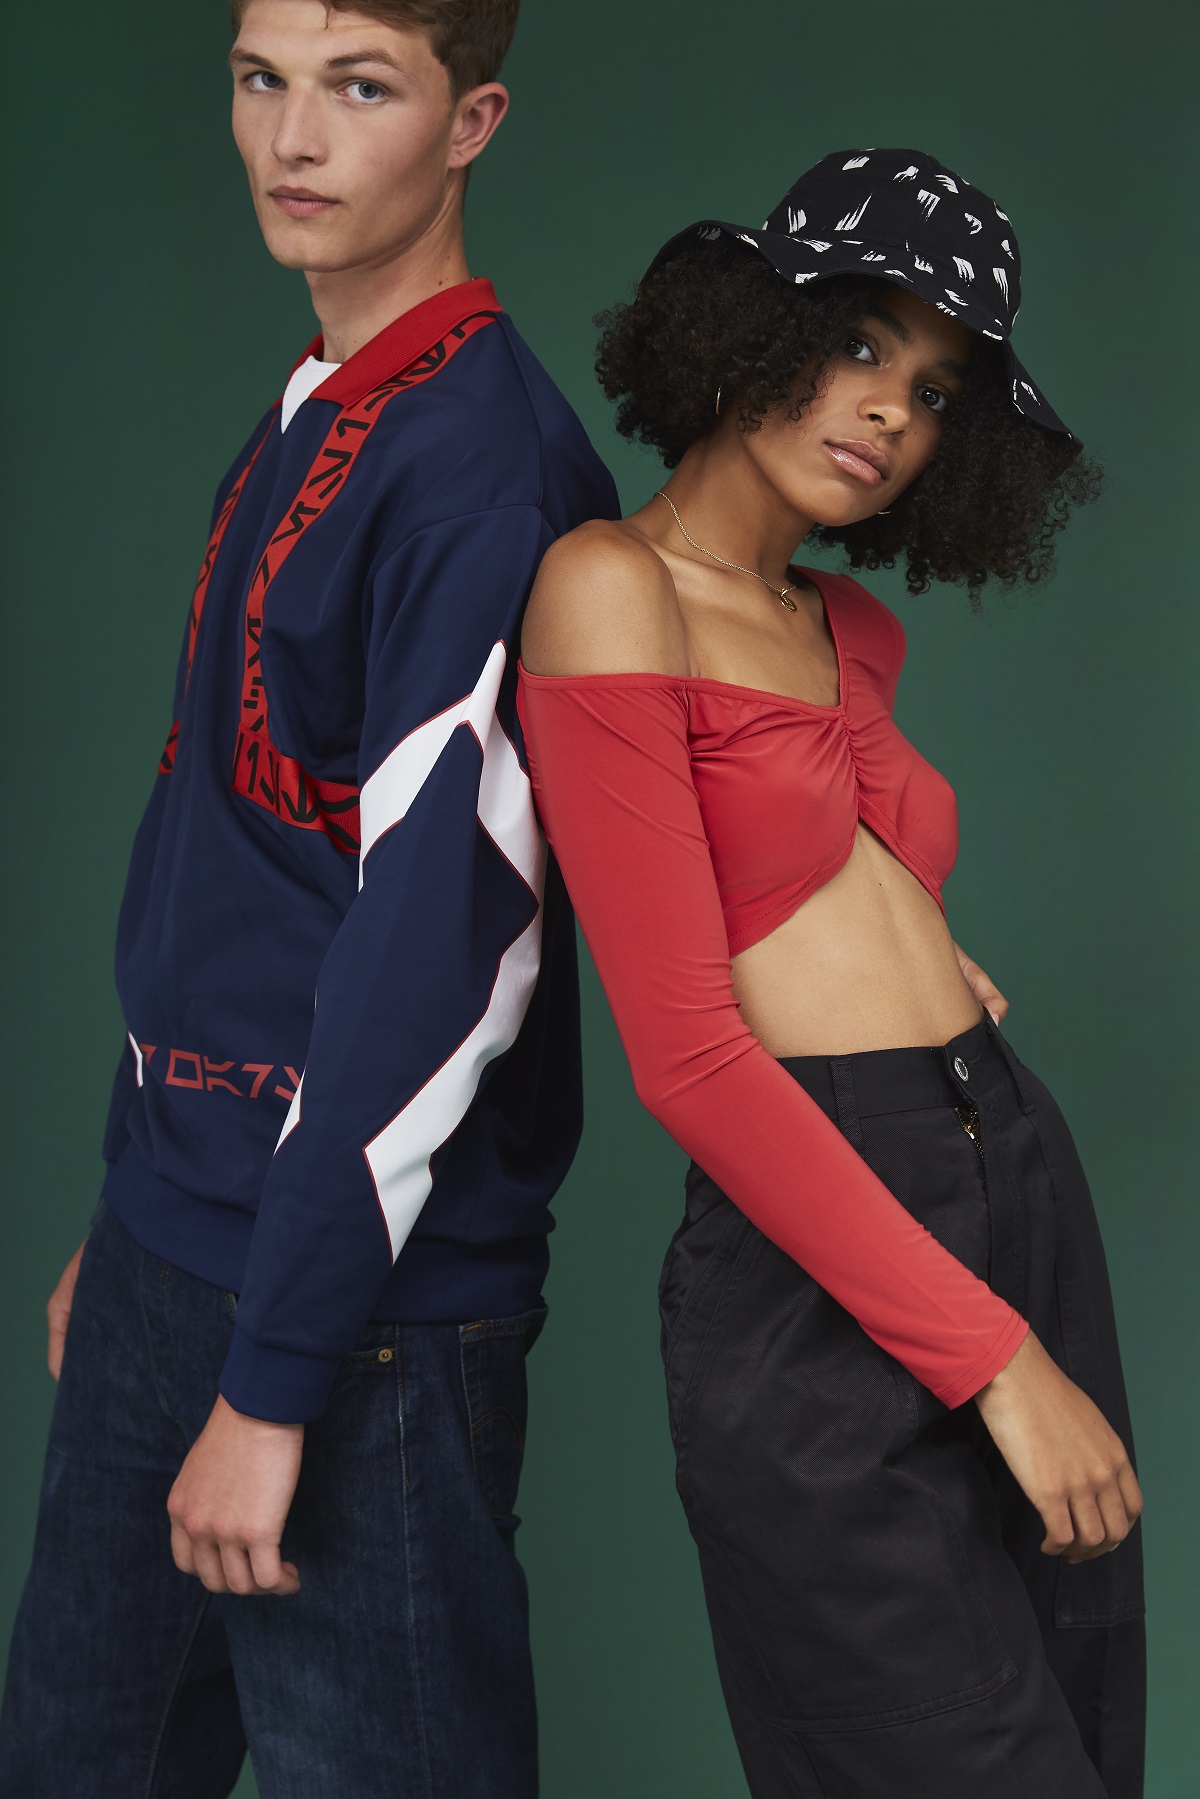 Two models showing off their second-hand outfits.